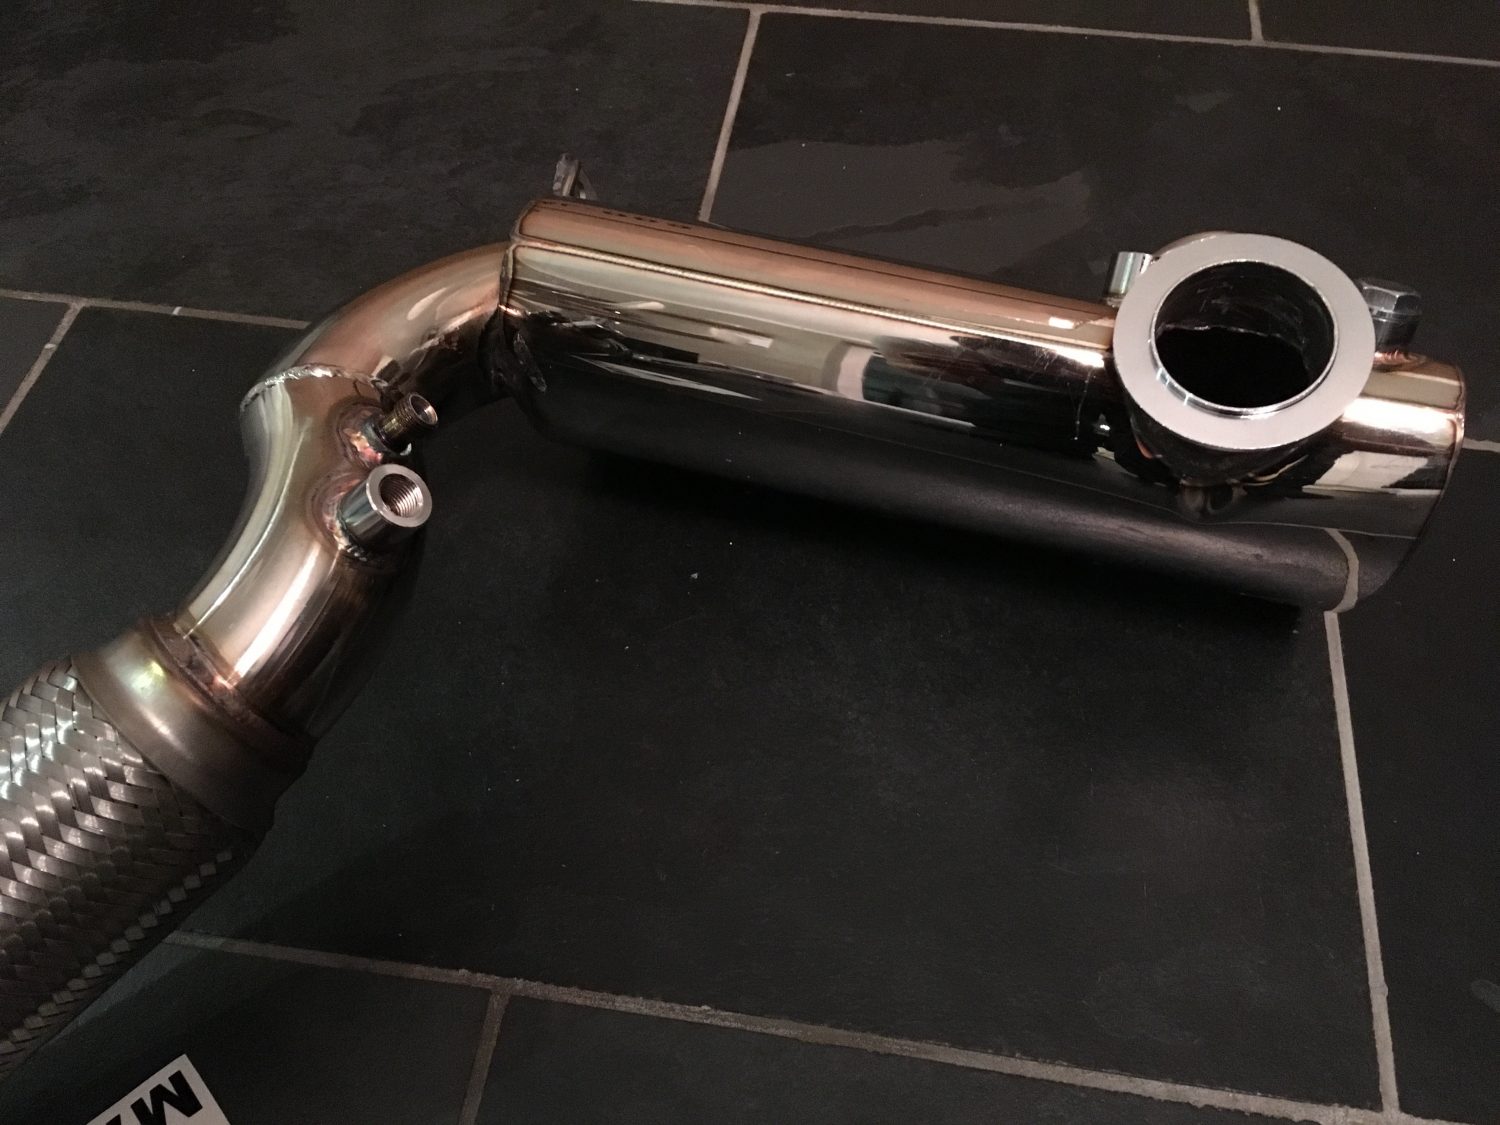 VW Scirocco 2.0 TDi 140/170BHP DPF Removal Stainless Performance Exhaust Pipe